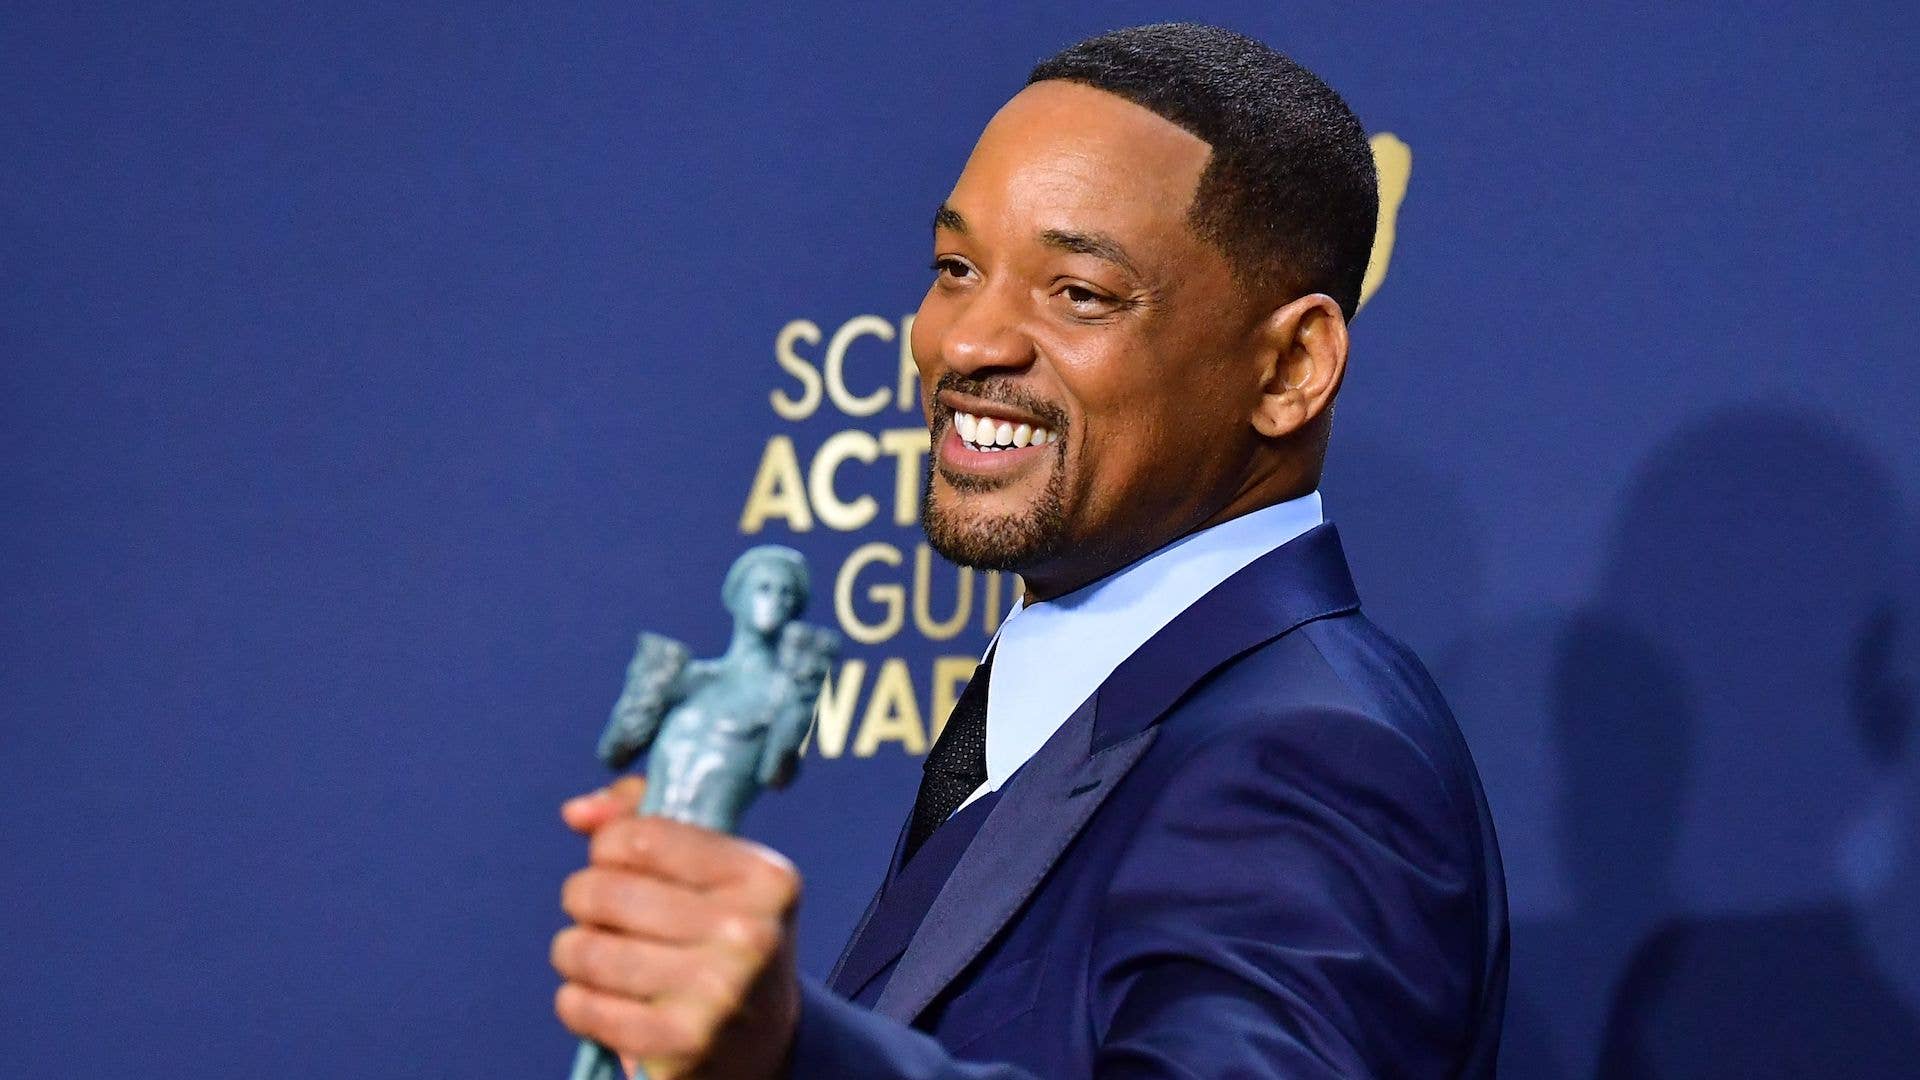 US actor Will Smith poses in the press room with his award for Outstanding Performance by a Male Actor.